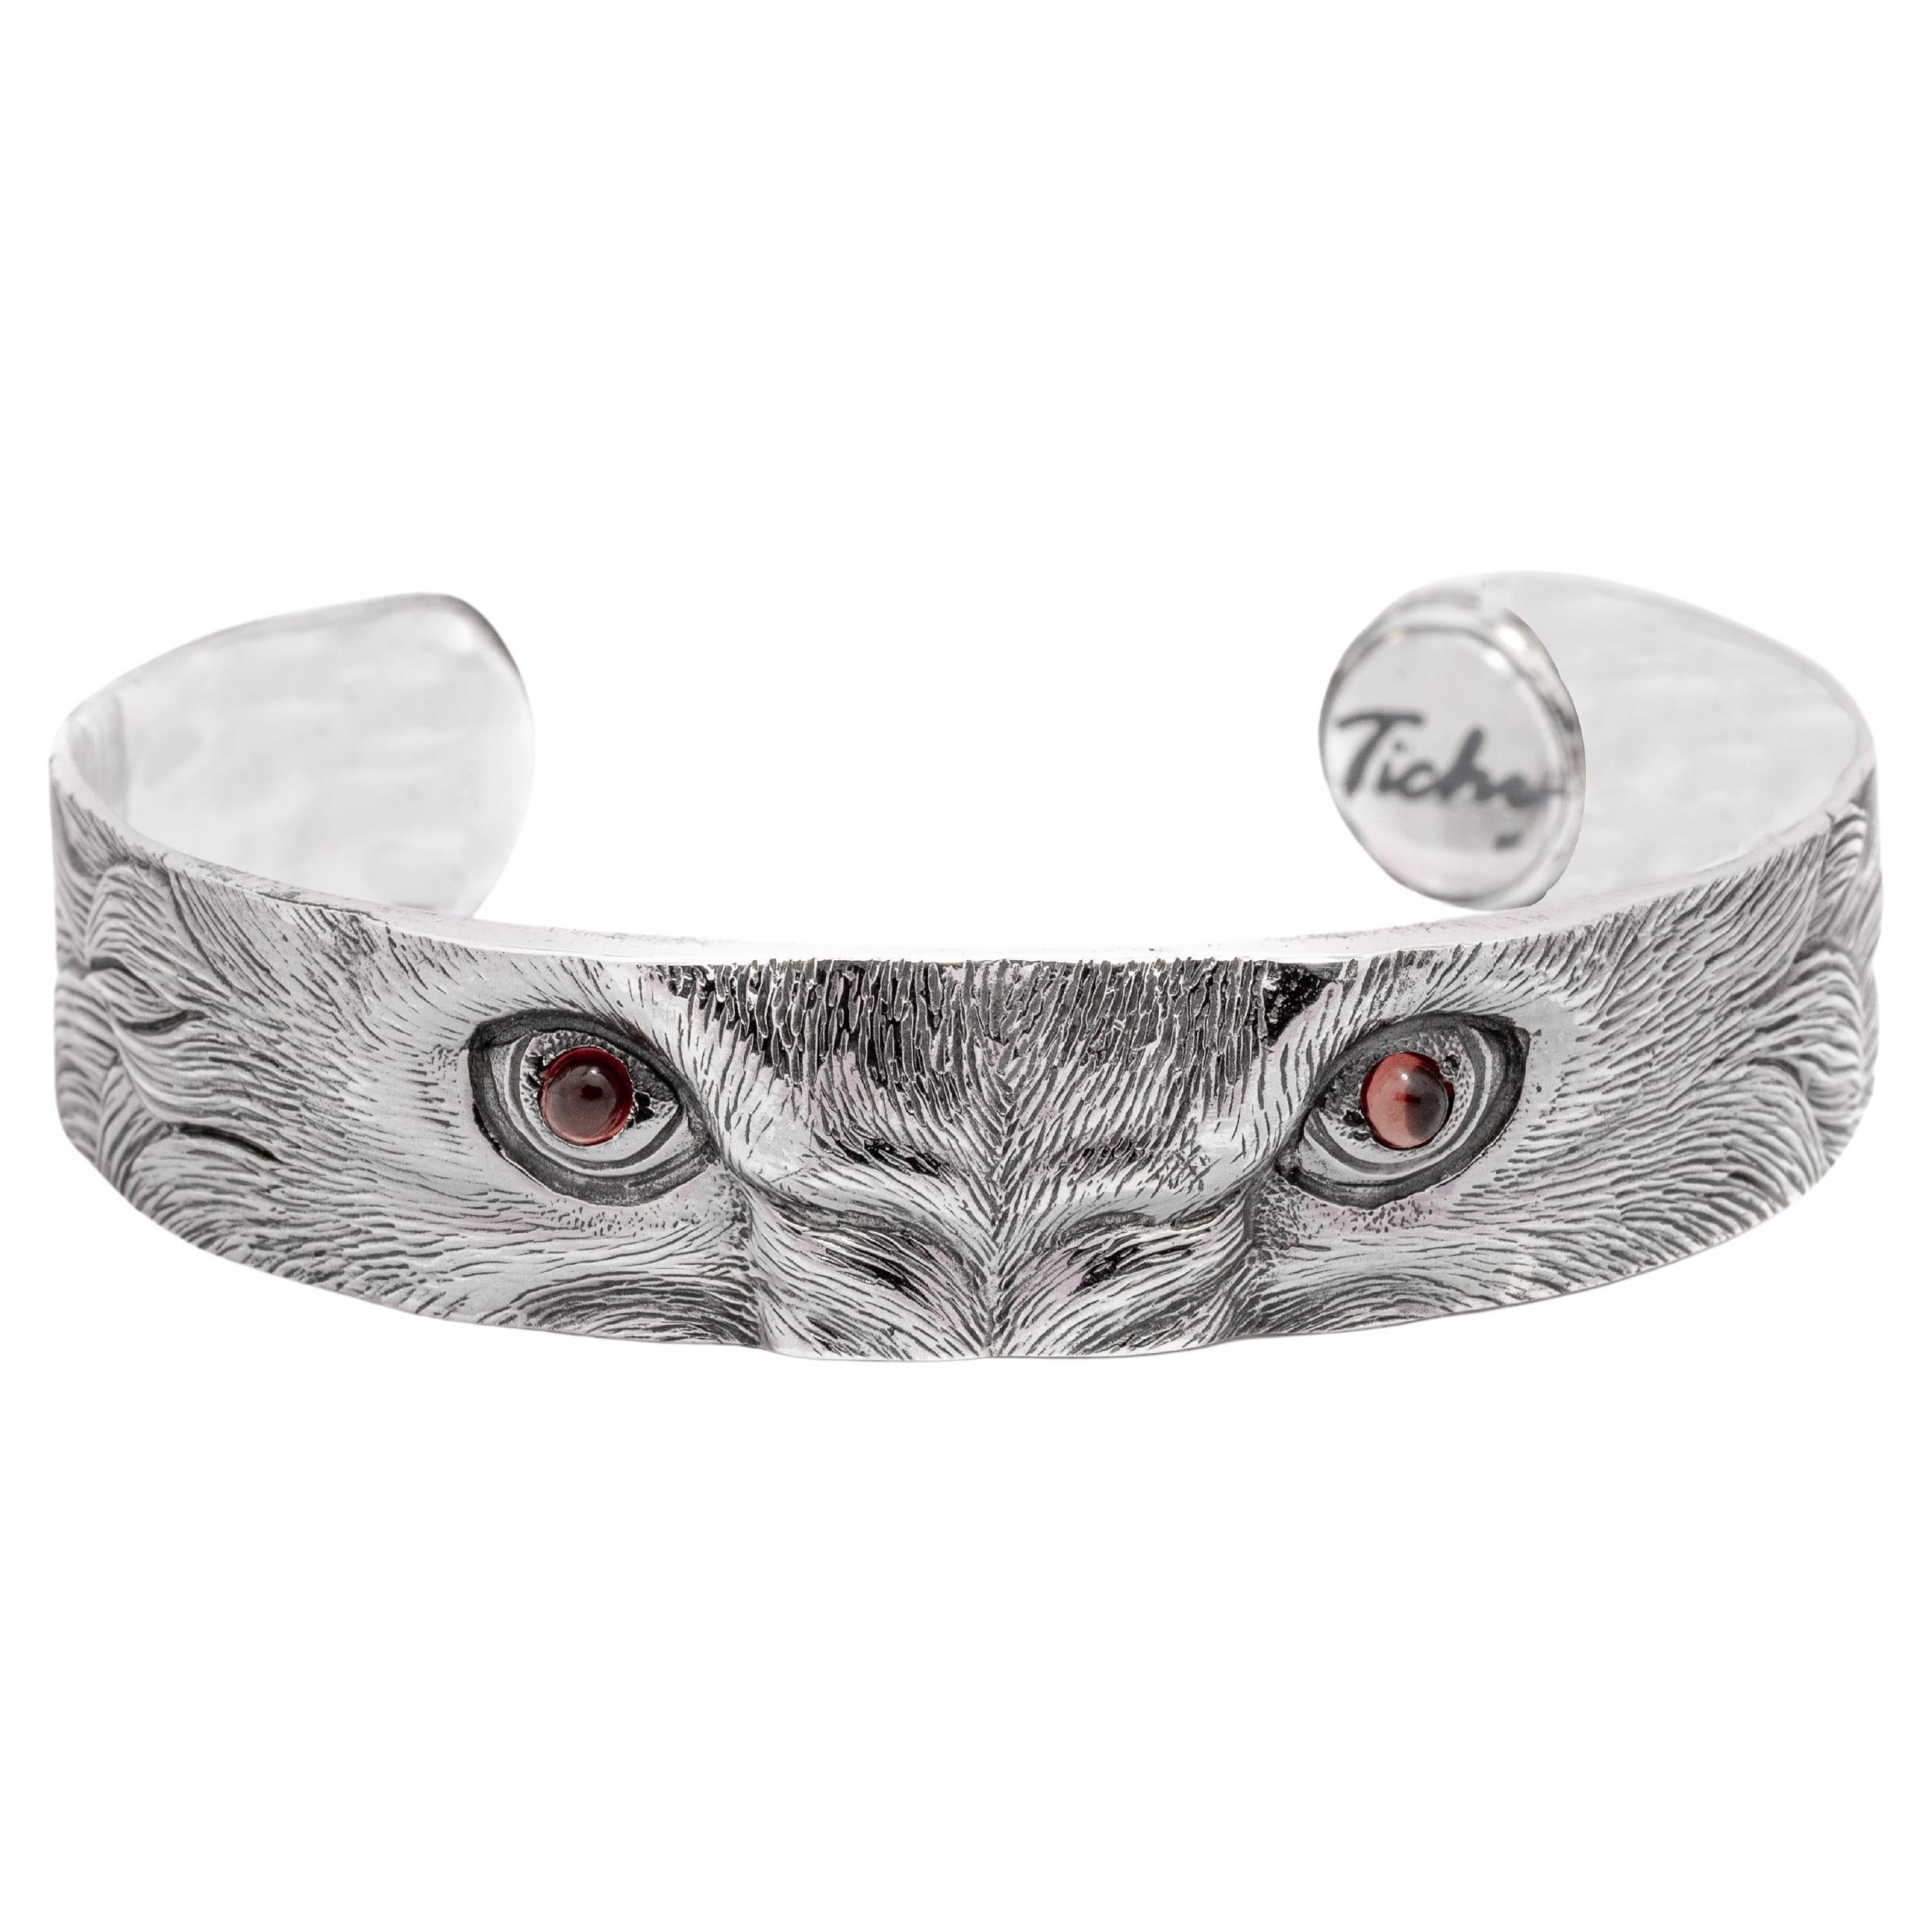 Tichu Citrine Lion Eyes Cuff in Sterling Silver and Crystal Quartz 'Size M' For Sale